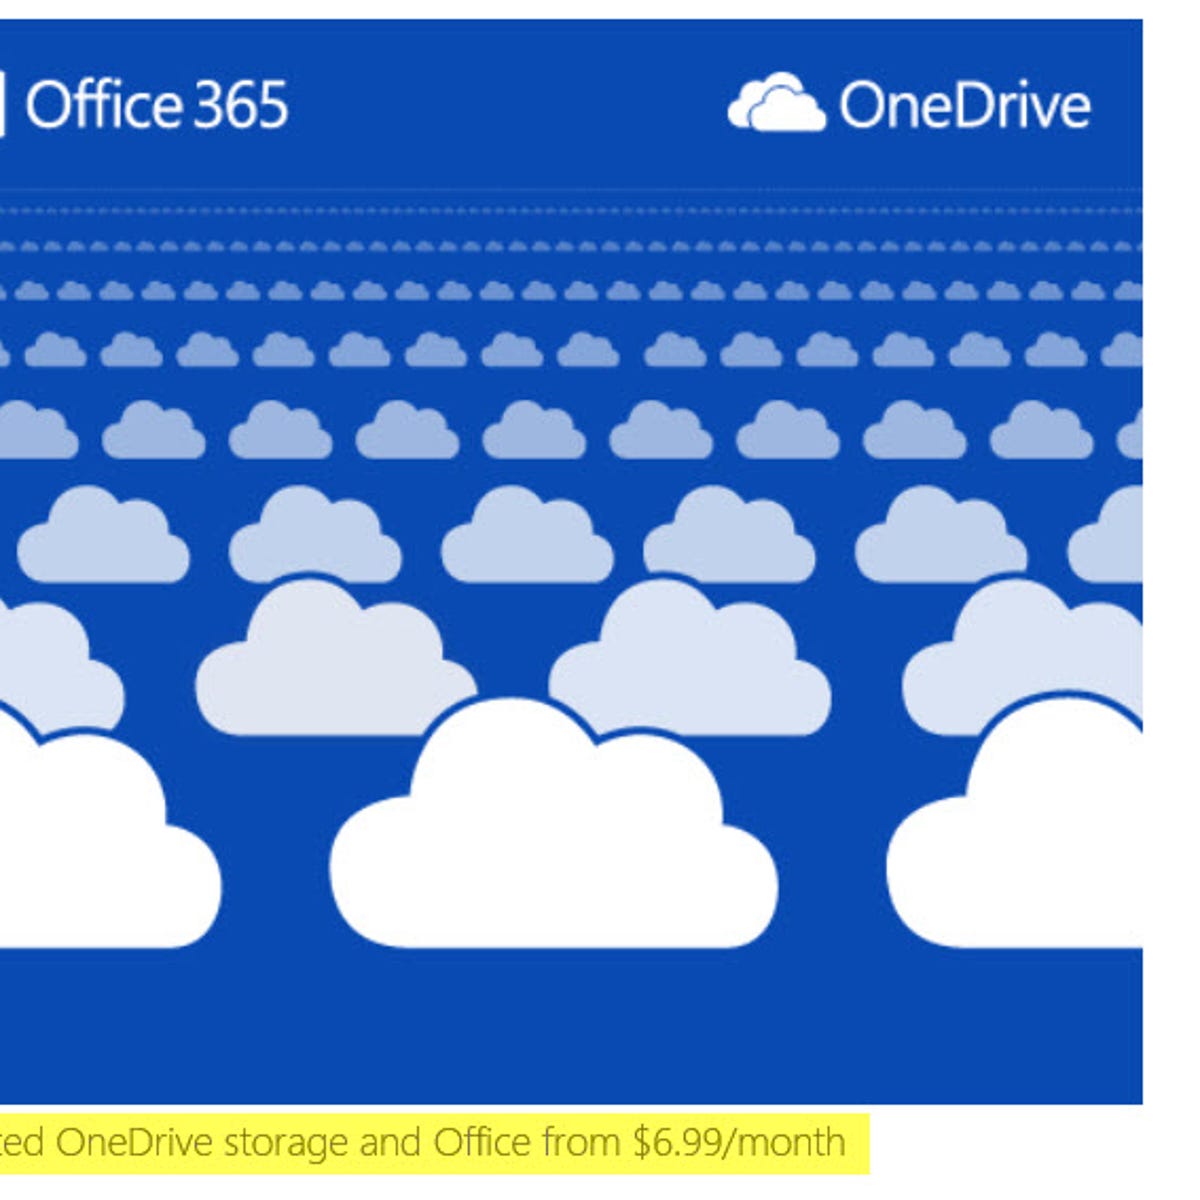 Microsoft reneges on 'unlimited' OneDrive storage promise for Office 365  subscribers | ZDNET